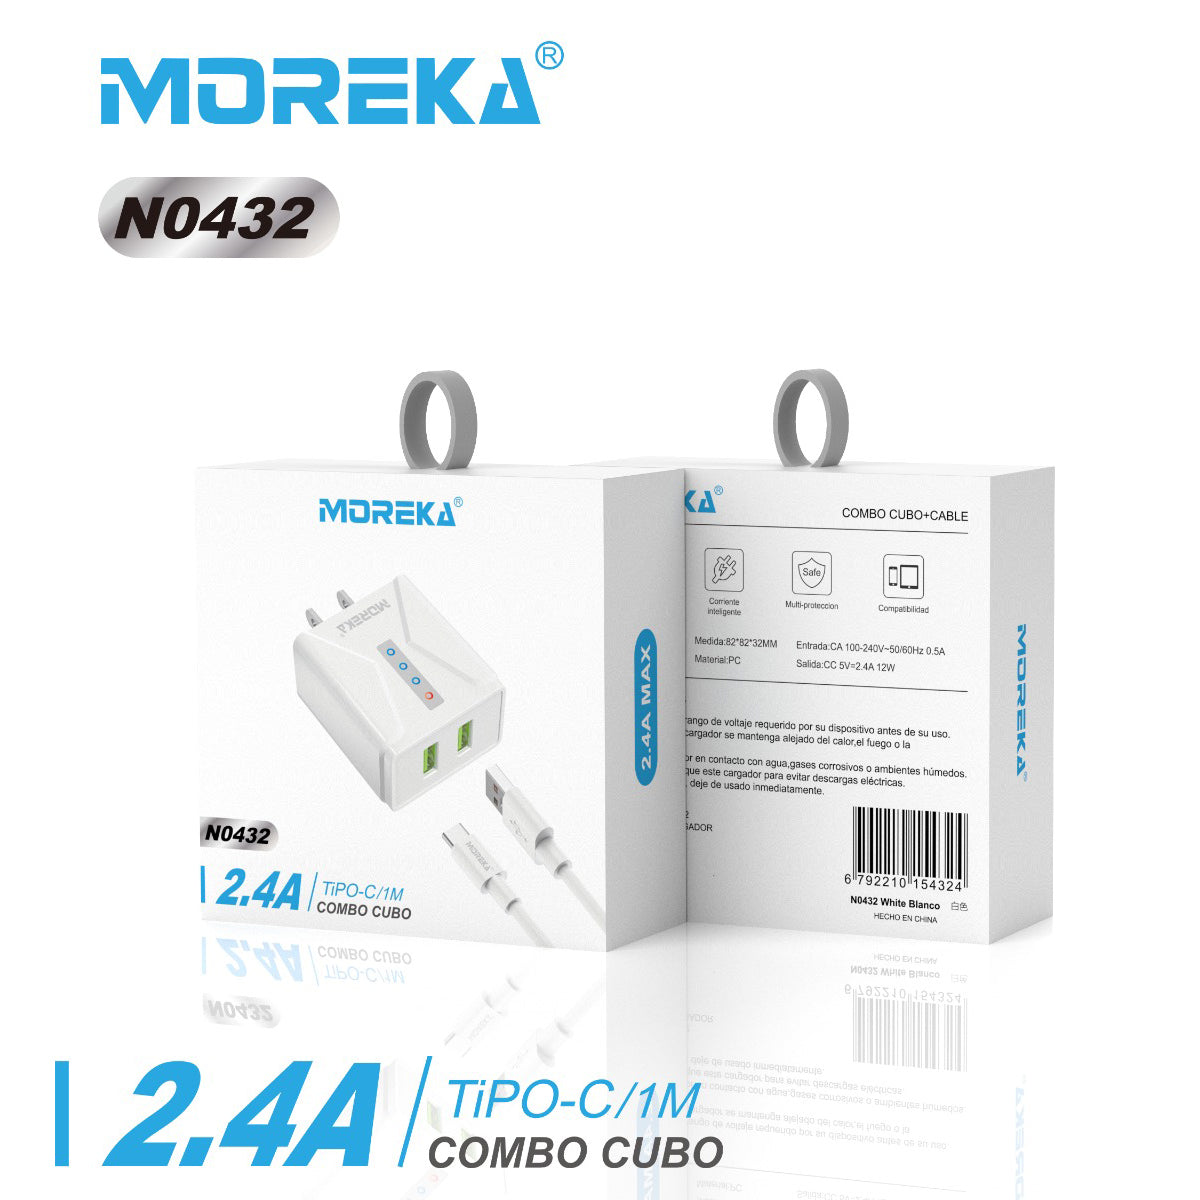 Moreka N0432 2.4A 2 USB Charger Includes Cable C 1M